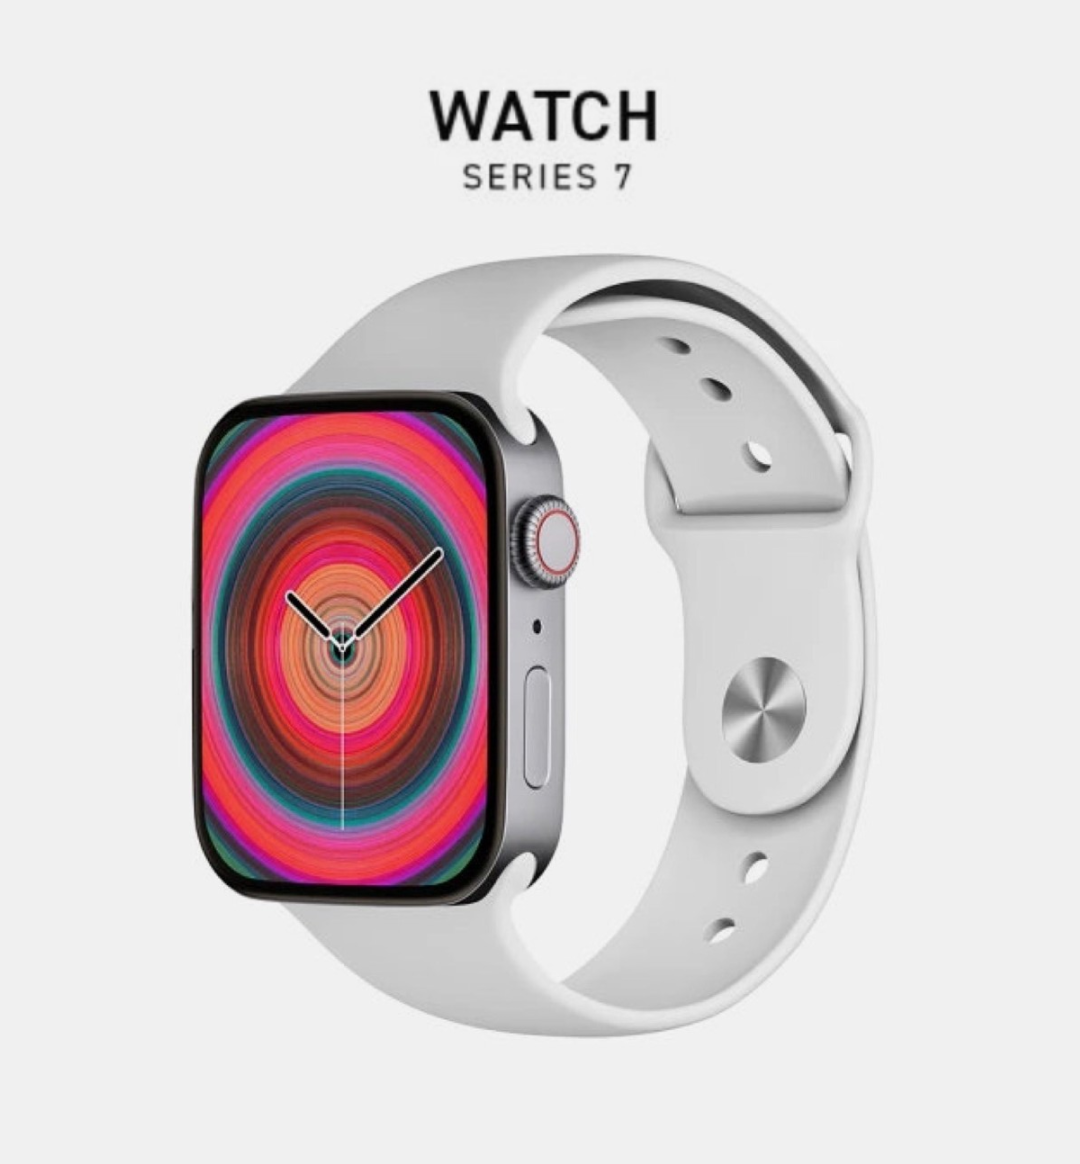 Apple Watch X with blood pressure monitor looks like a big winner - analyst